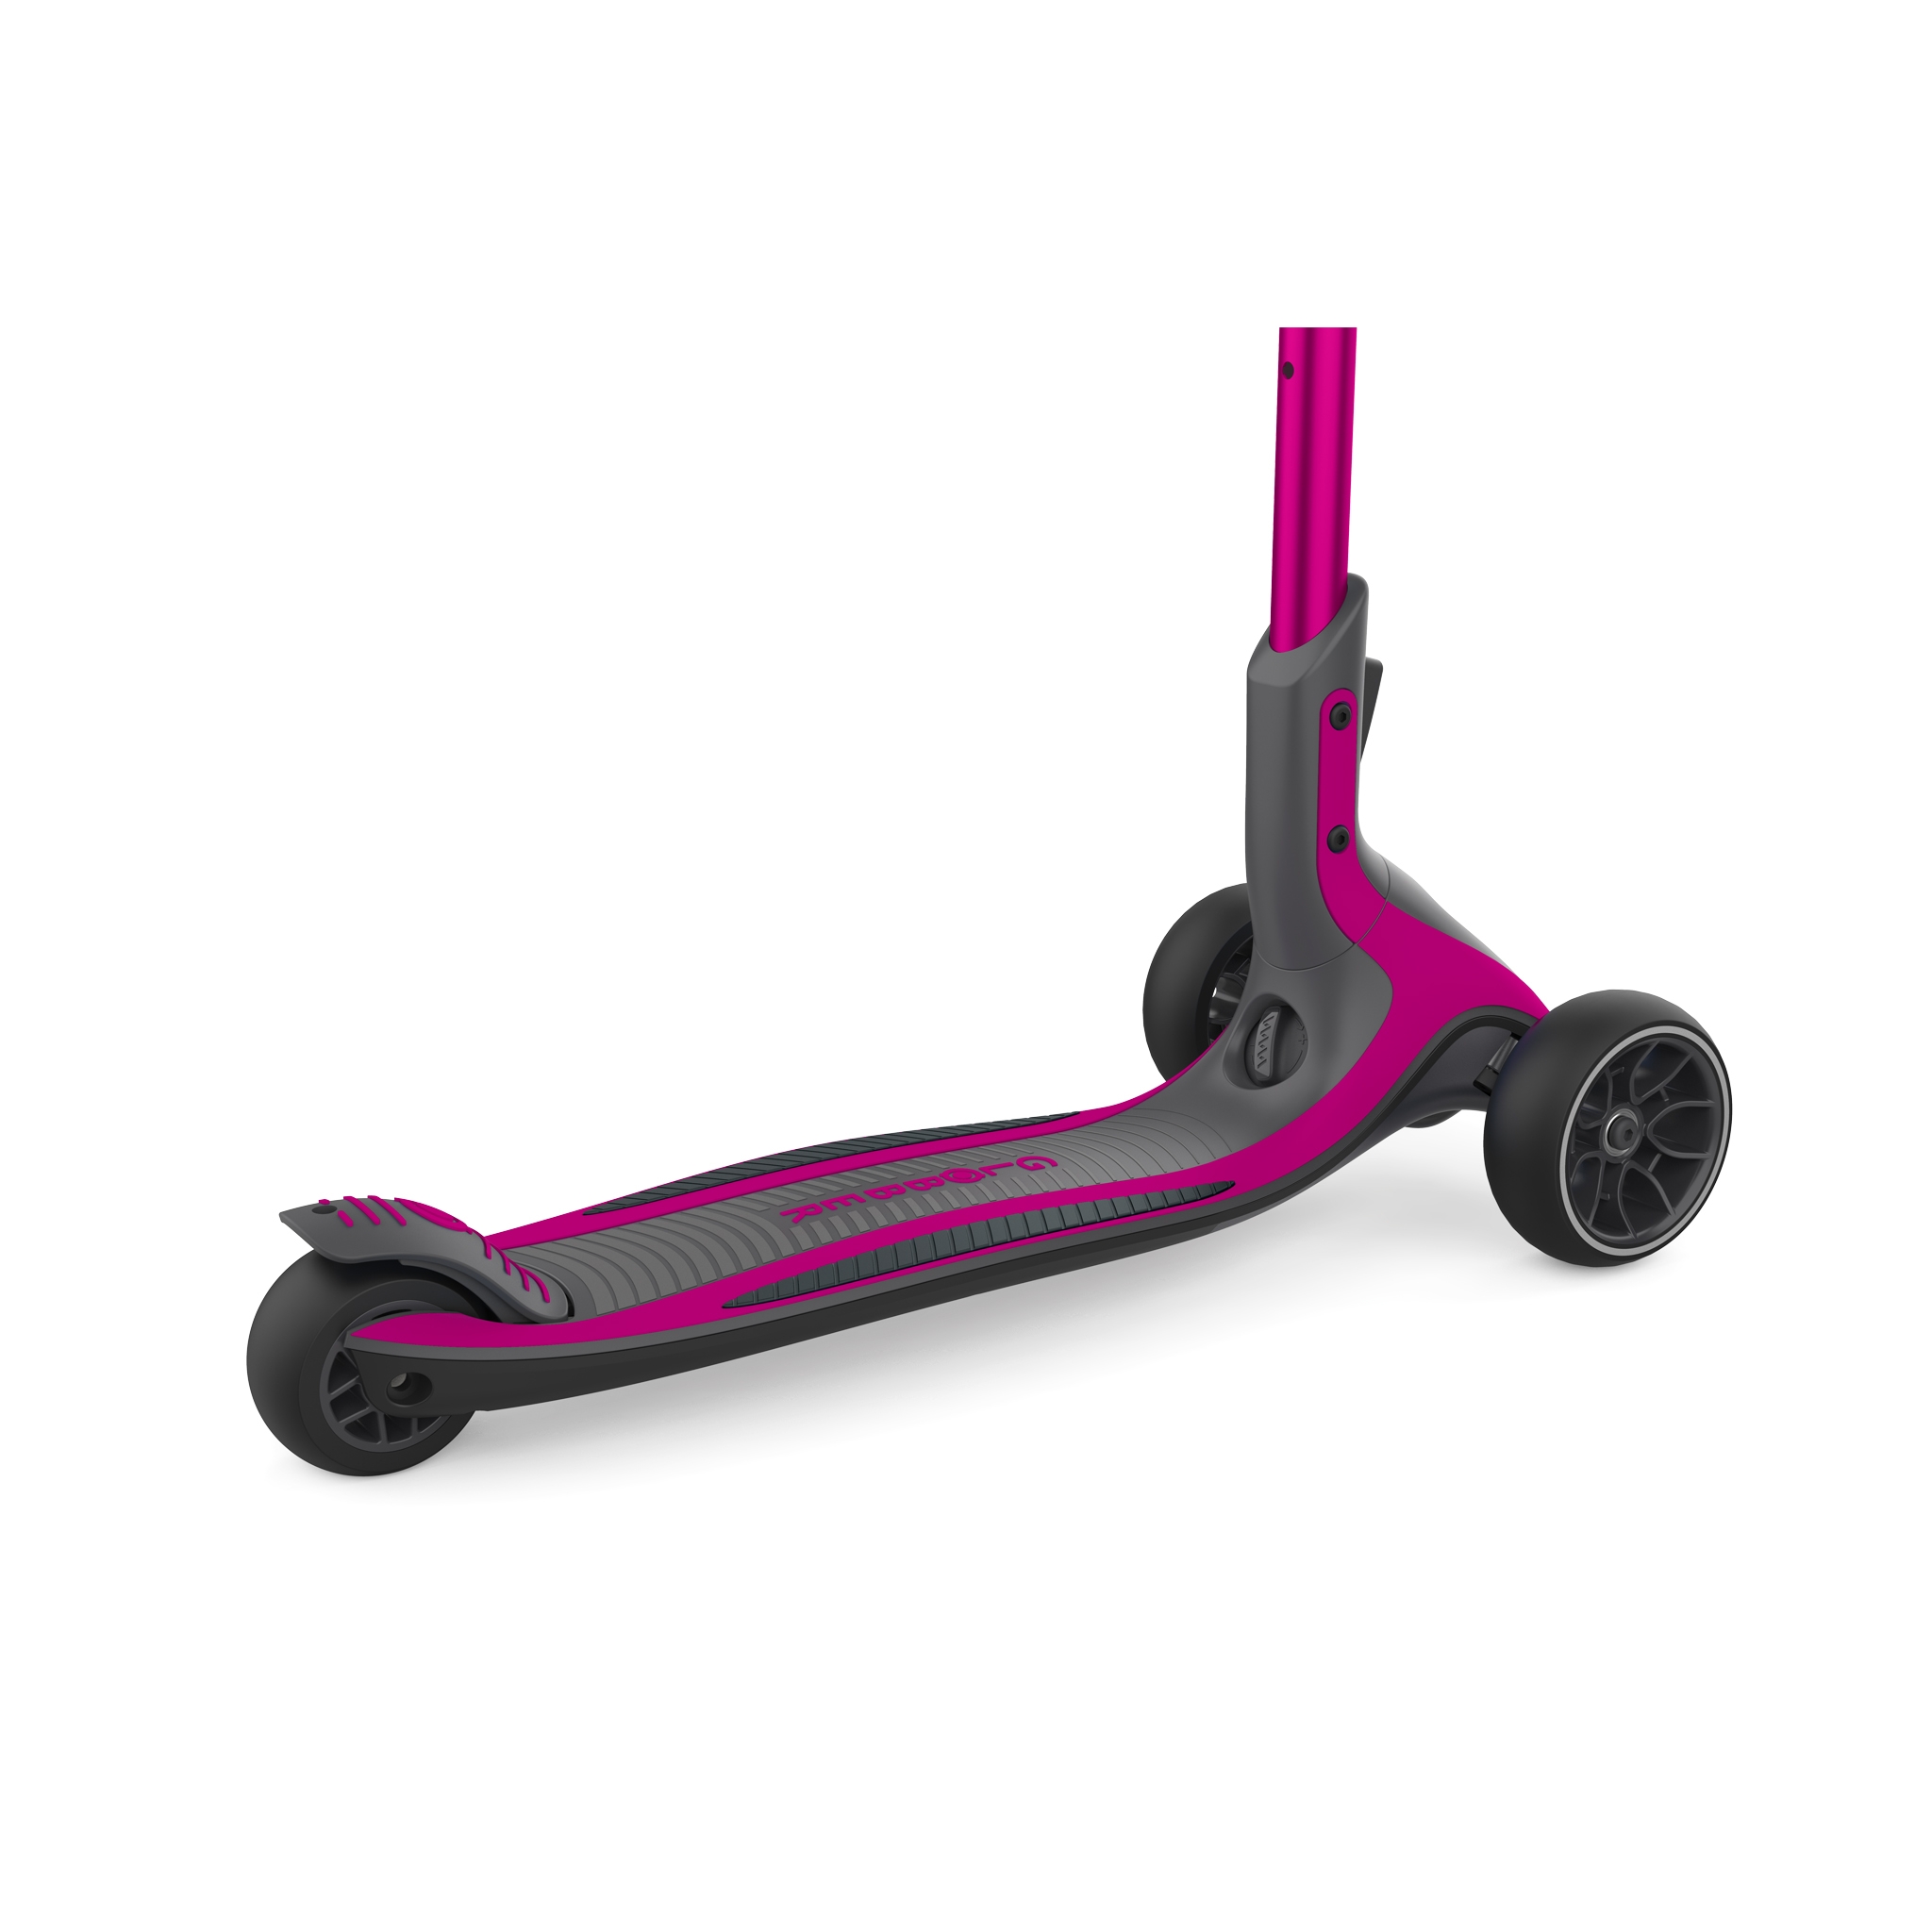 3 wheel foldable scooter for kids, teens and adults - Globber ULTIMUM 5